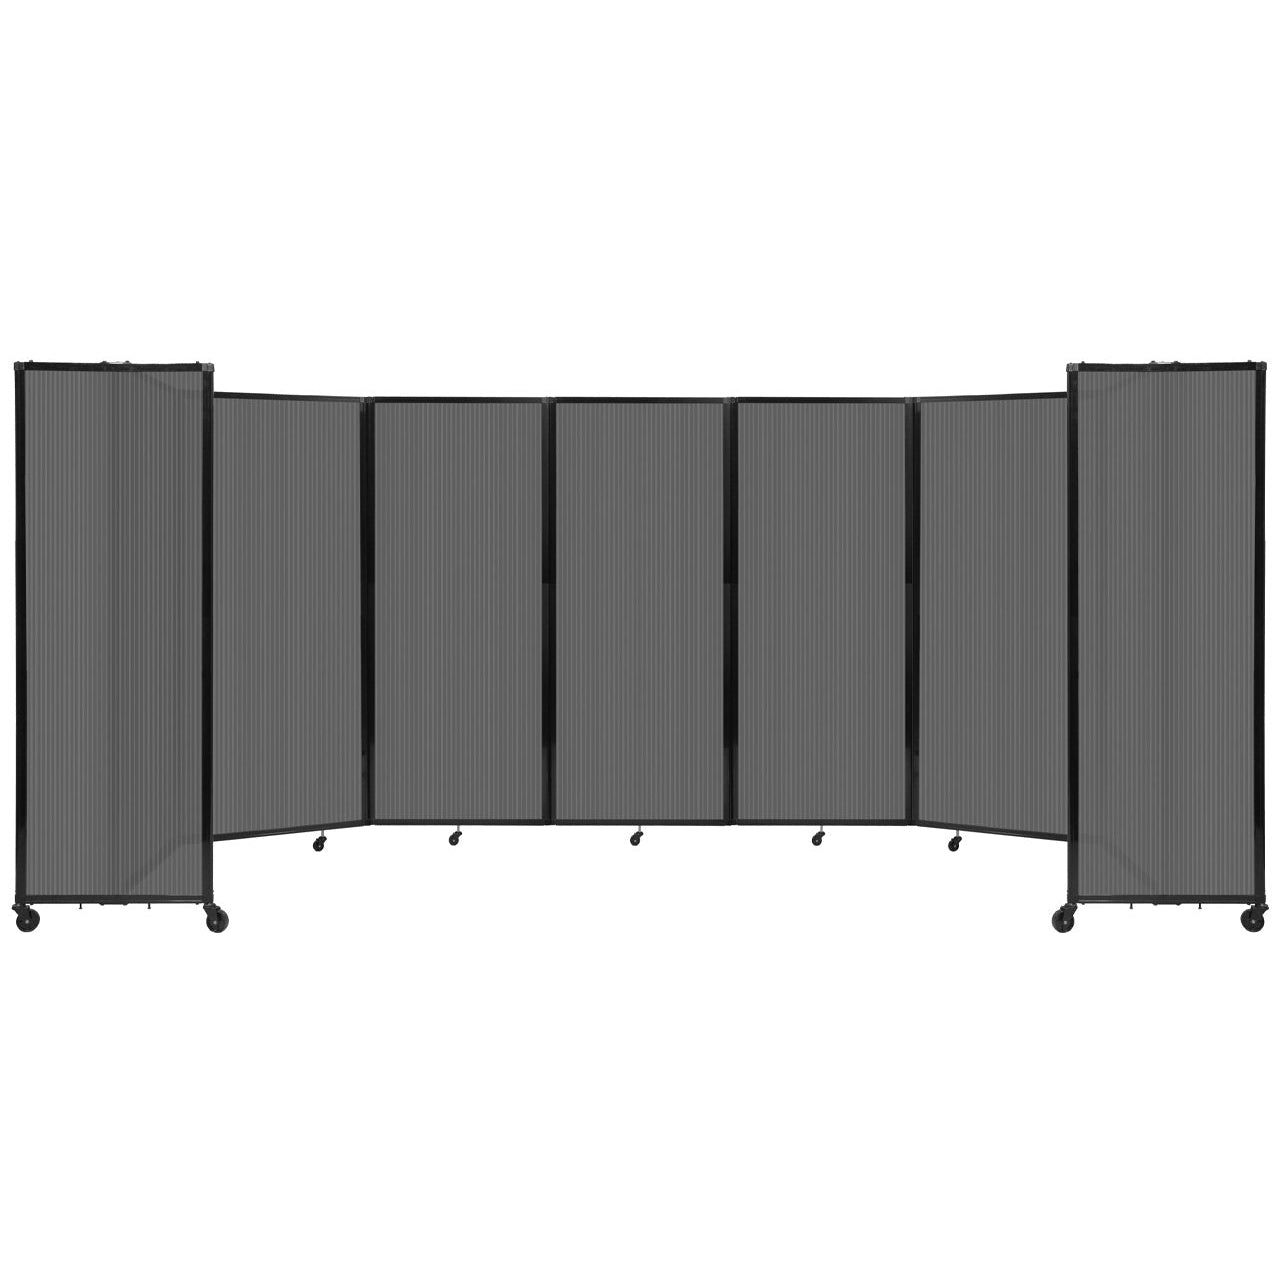 Room Divider 360° Folding Portable Partition with Fluted Polycarbonate Panels, 19' 6" W x 6' 10" H